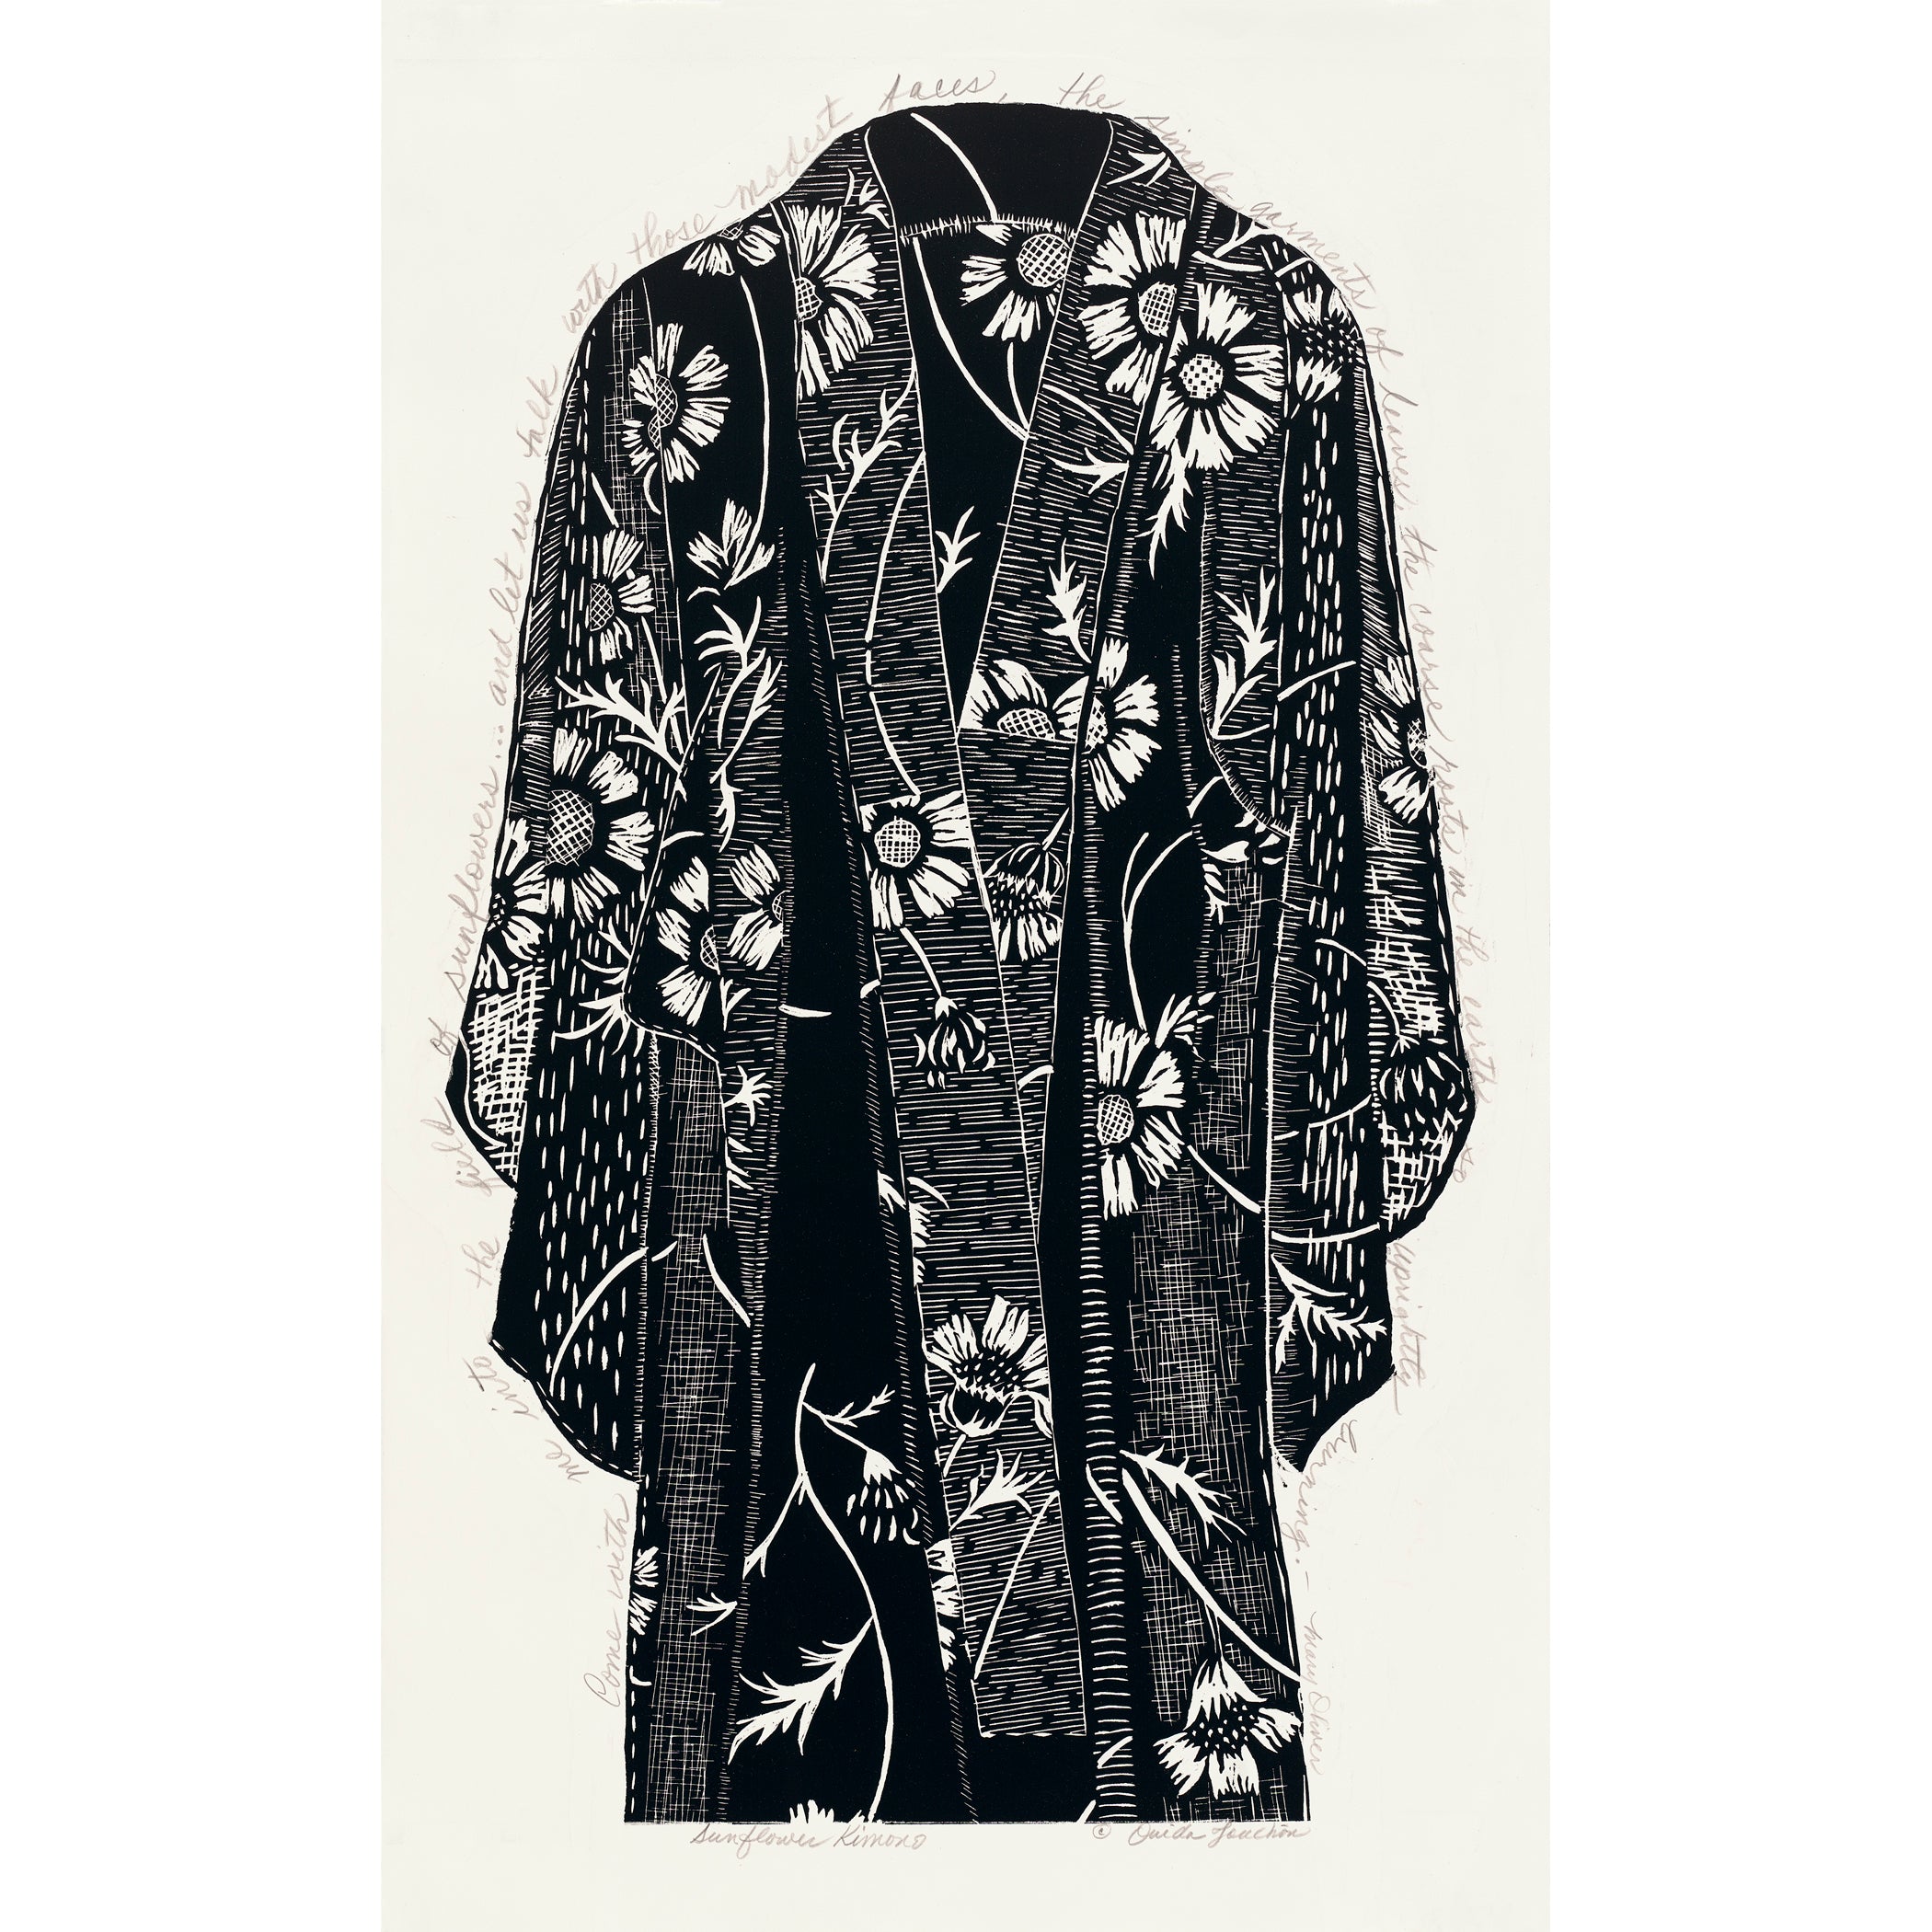 Sunflower Kimono, hand printed in black ink on Japanese paper, for sale by Ouida Touchon